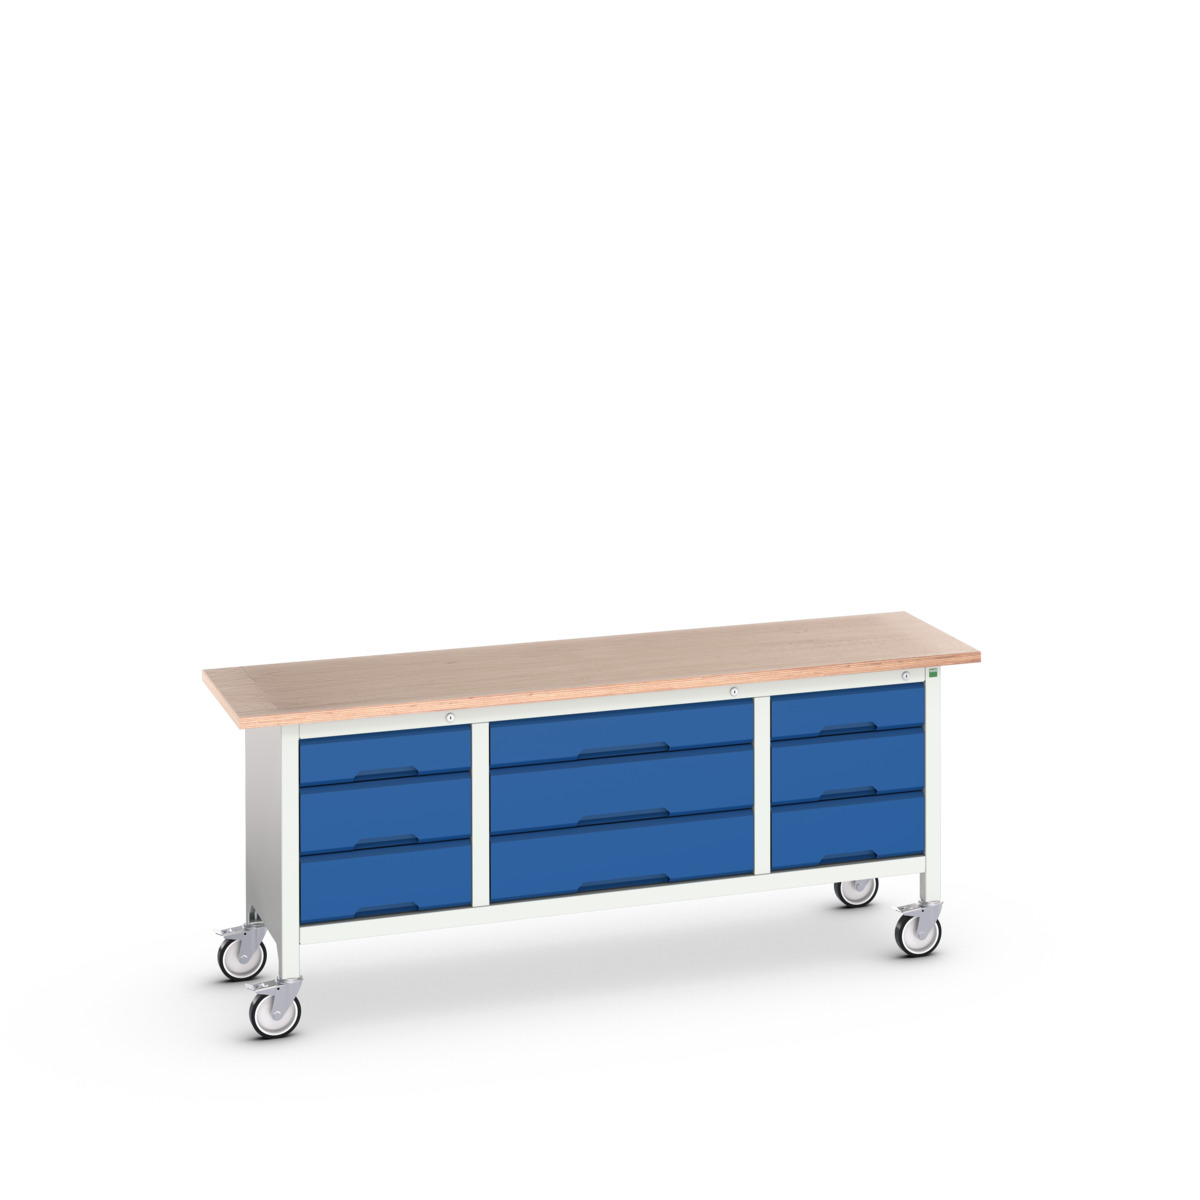 16923233.11 - verso mobile storage bench (mpx)